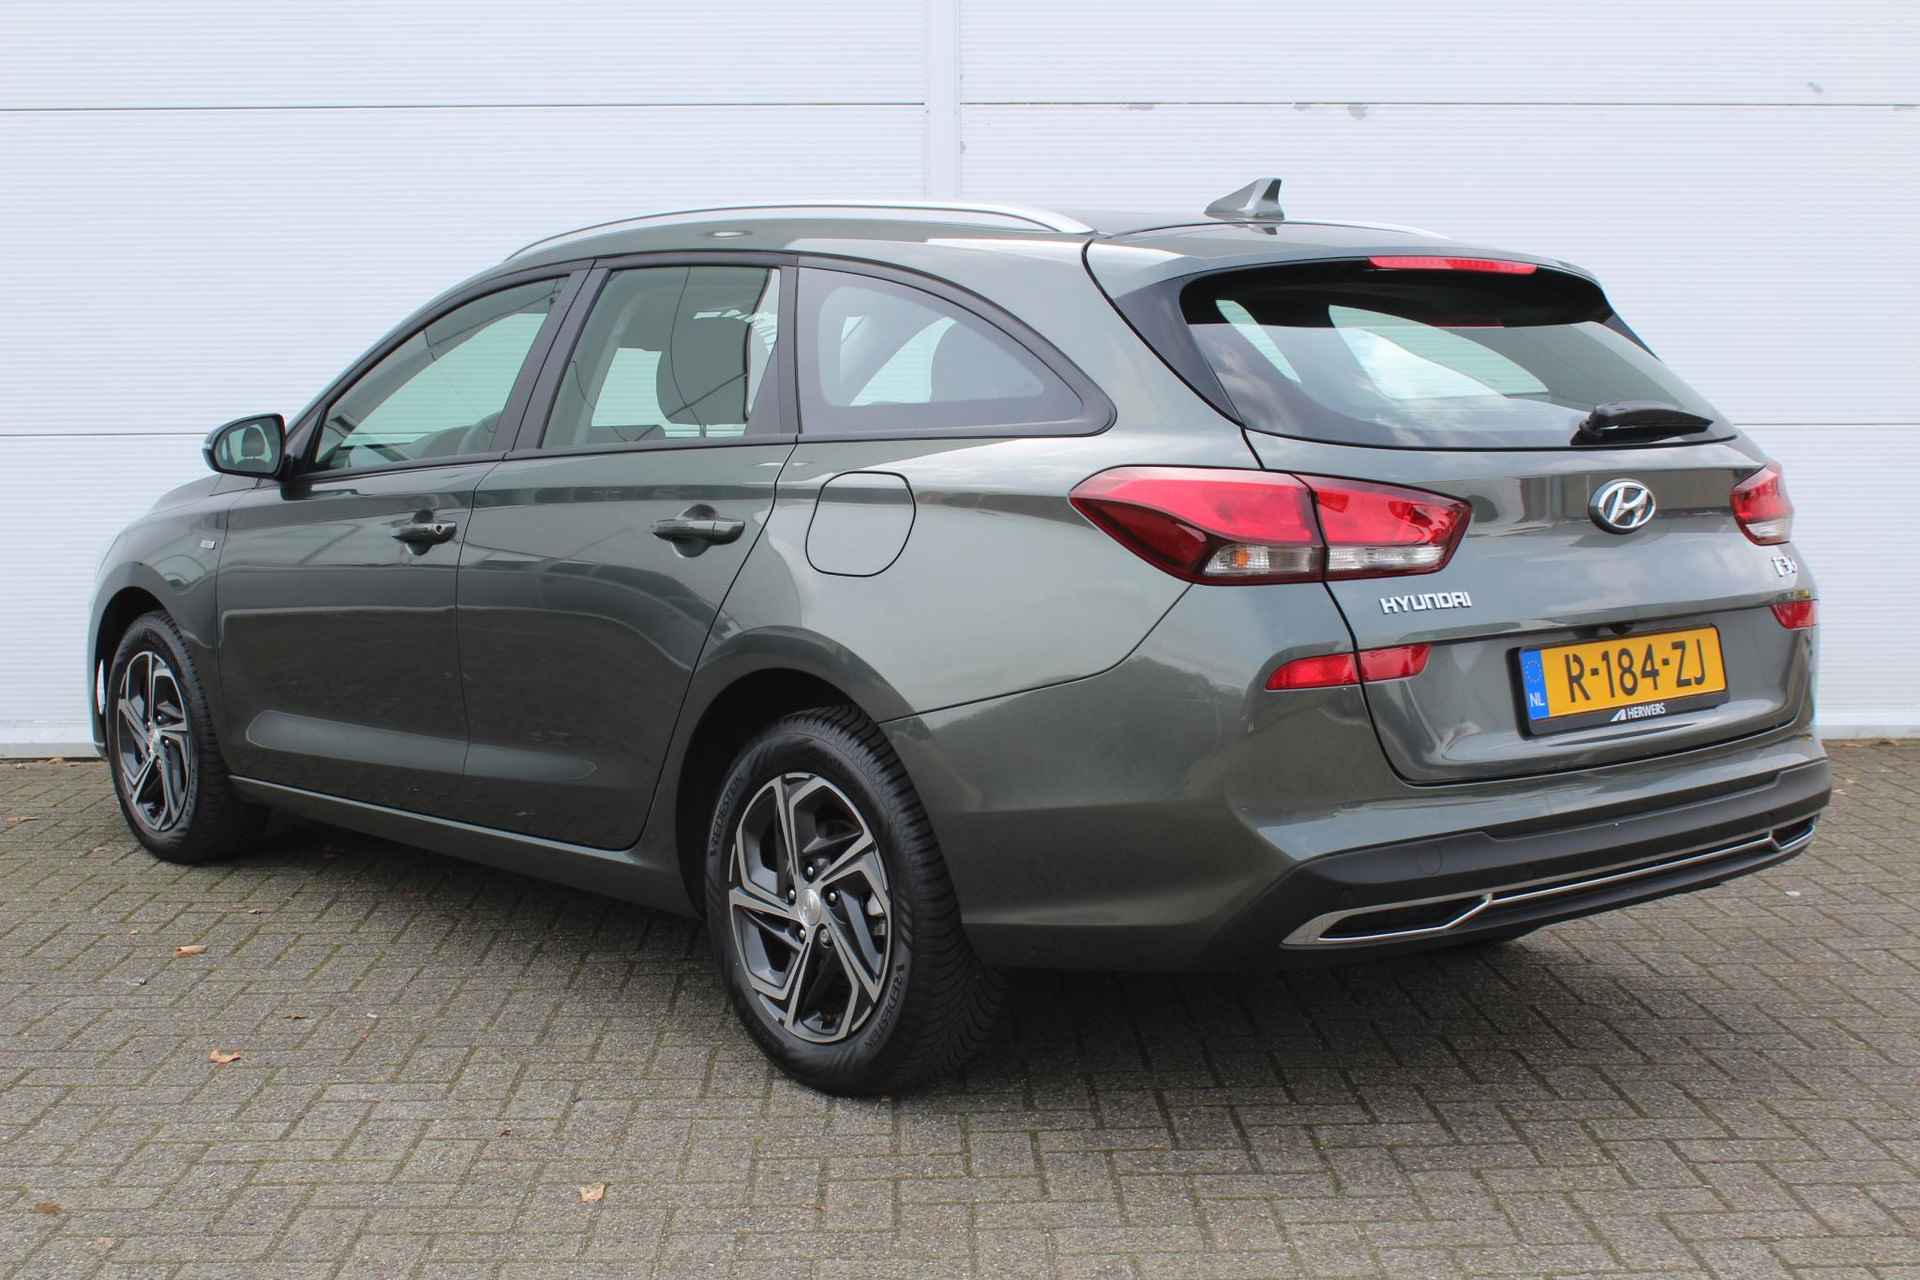 Hyundai i30 Wagon 1.0 T-GDi MHEV Comfort Smart AUTOMAAT / Navigatie + Apple Carplay/Android Auto / Cruise Control / Achteruitrijcamera / Climate Control / Keyless Entry & Start / - 16/43